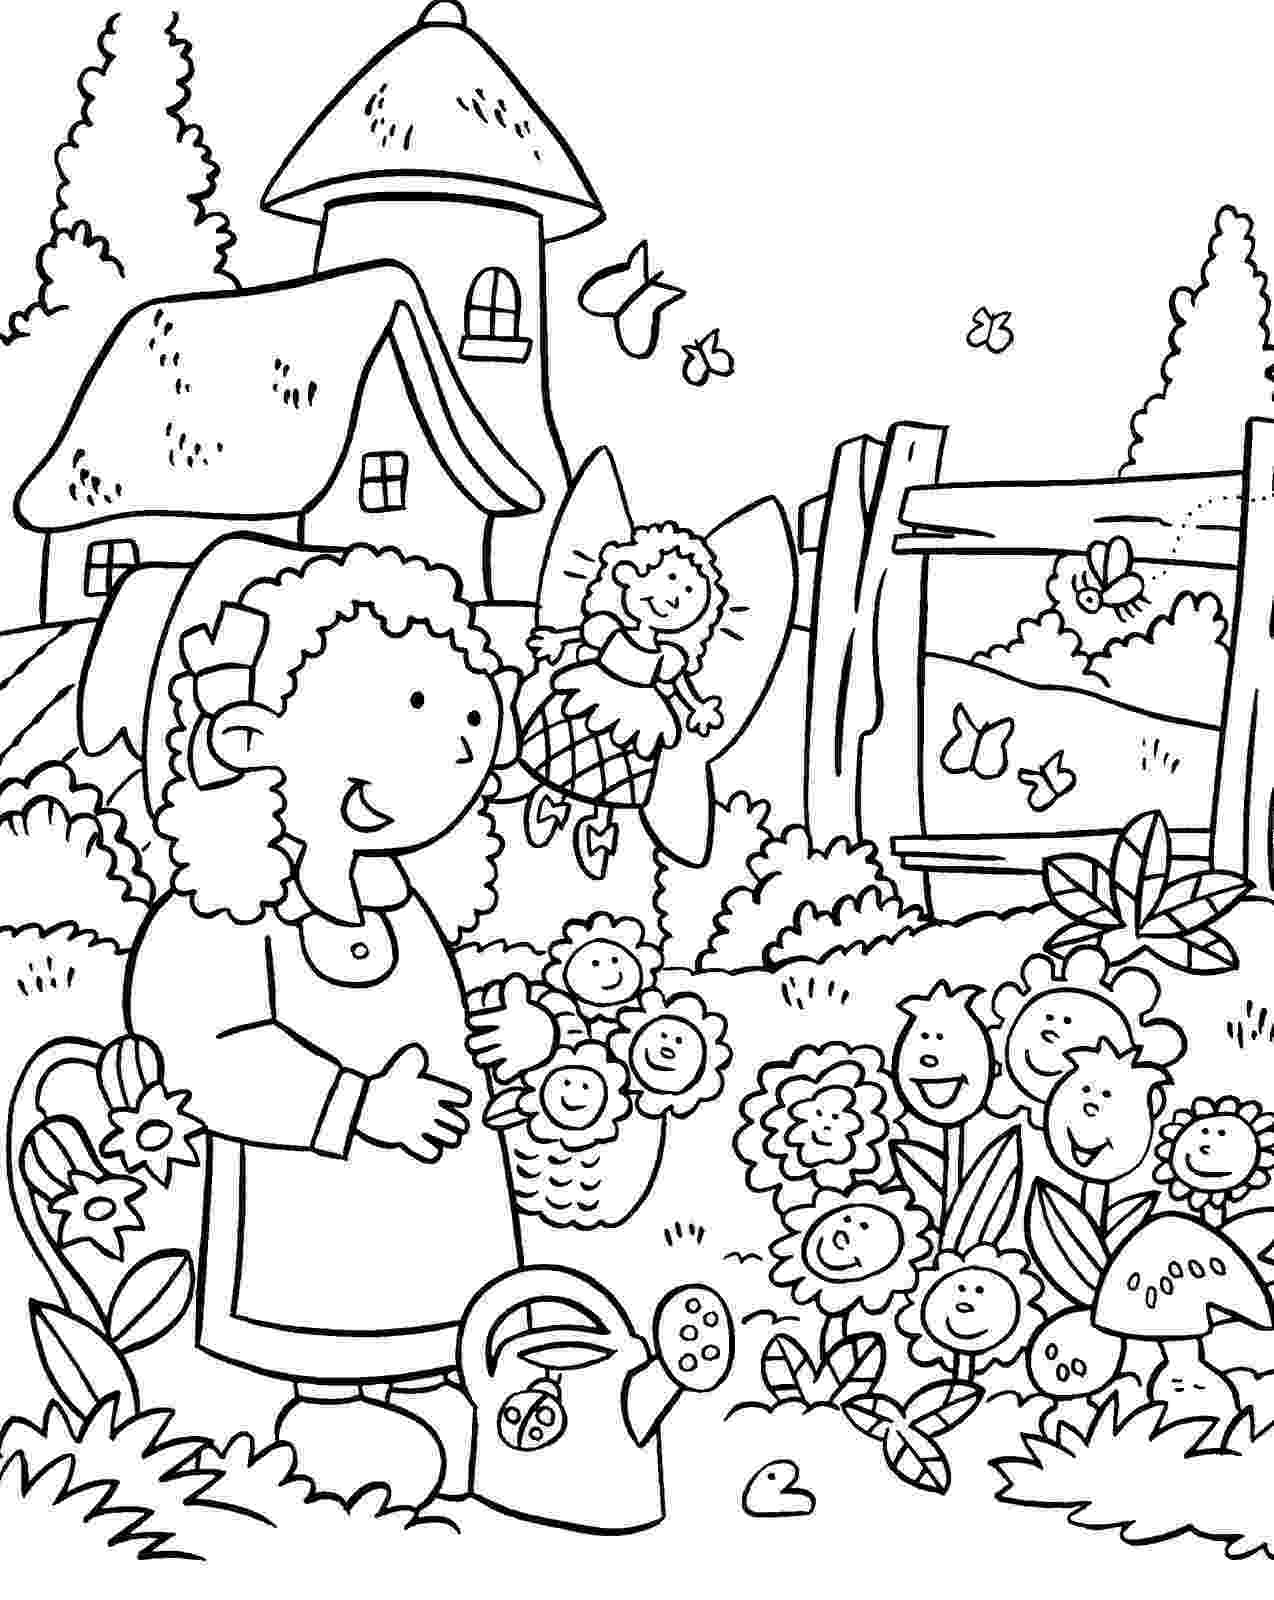 garden coloring gardening coloring pages best coloring pages for kids coloring garden 